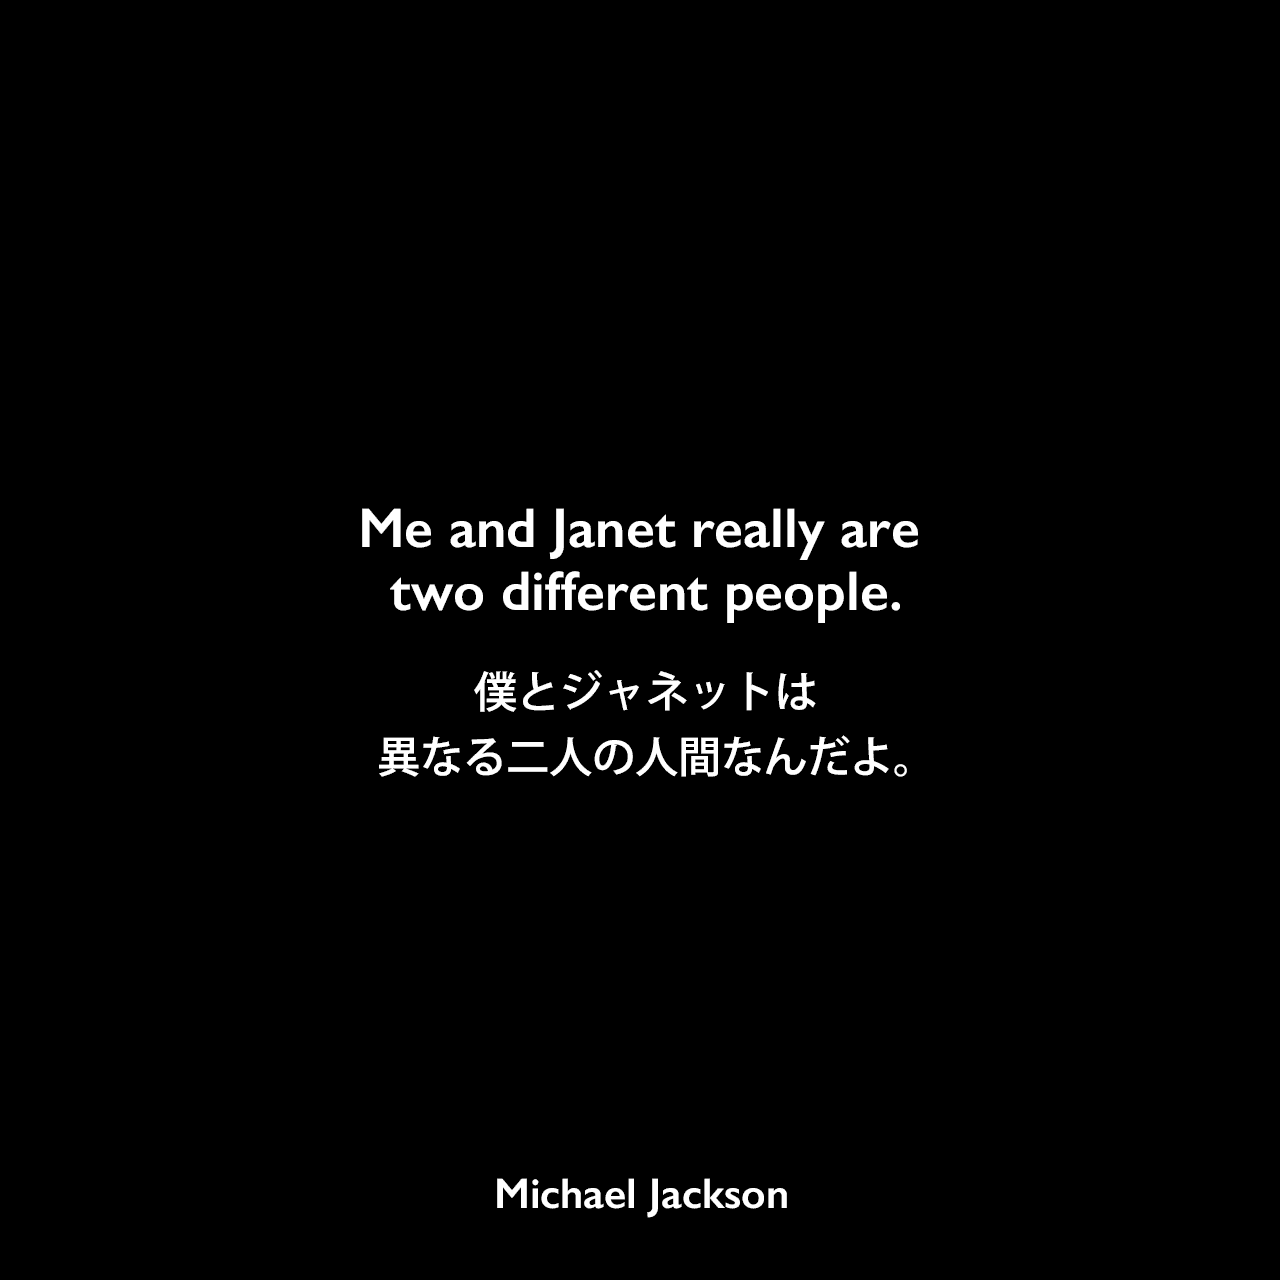 Me and Janet really are two different people.僕とジャネットは異なる二人の人間なんだよ。Michael Jackson